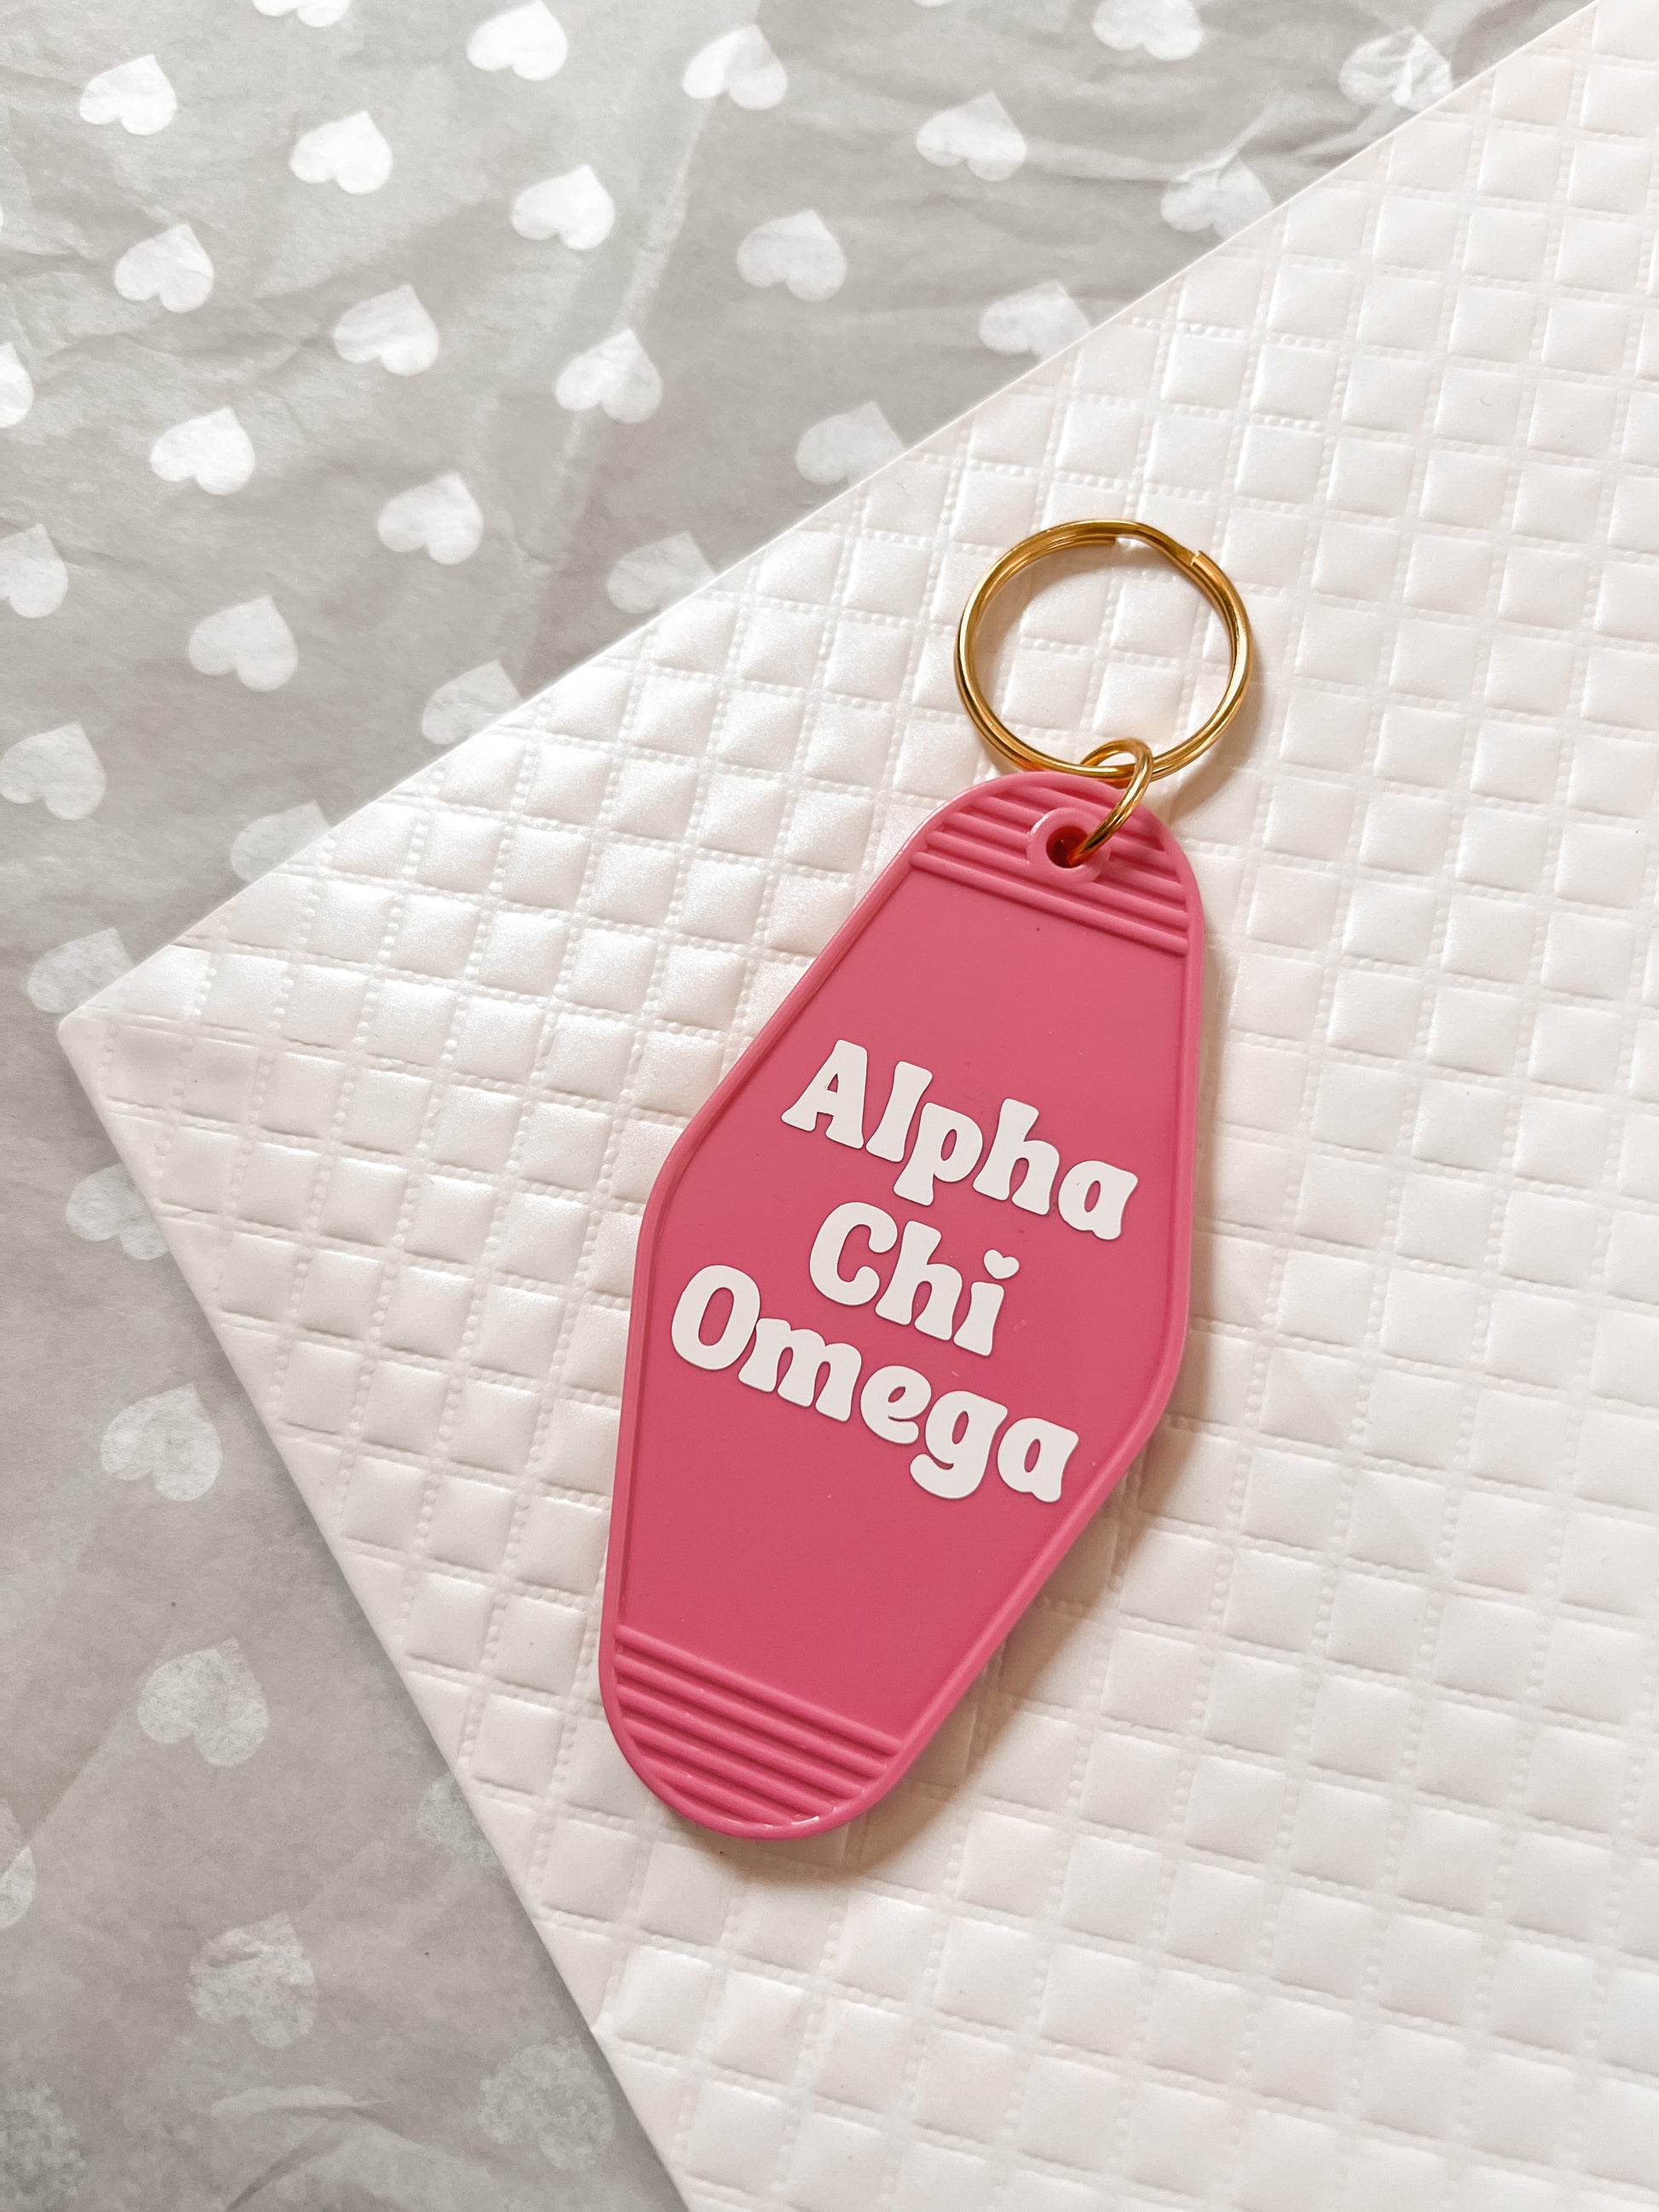 Alpha Chi Omega Motel Hotel Key Chain in Hot pink with white letters and gold ring. AXO